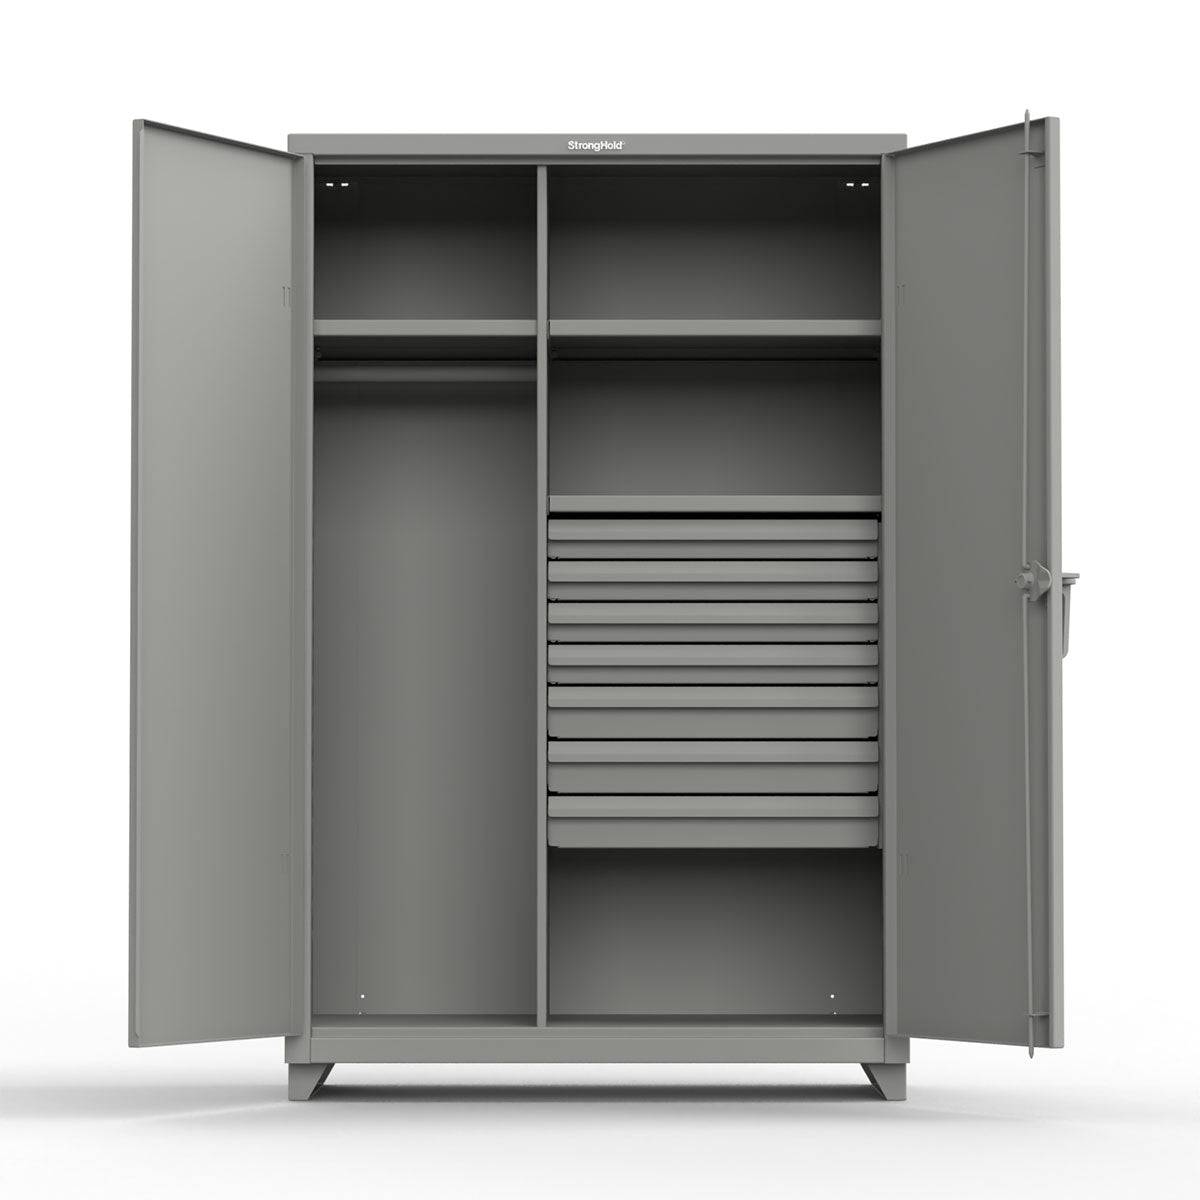 Extreme Duty 12 GA Uniform Cabinet with 4 Drawers, 4 Shelves - 48 In. W x 24 In. D x 78 In. H - Strong Hold